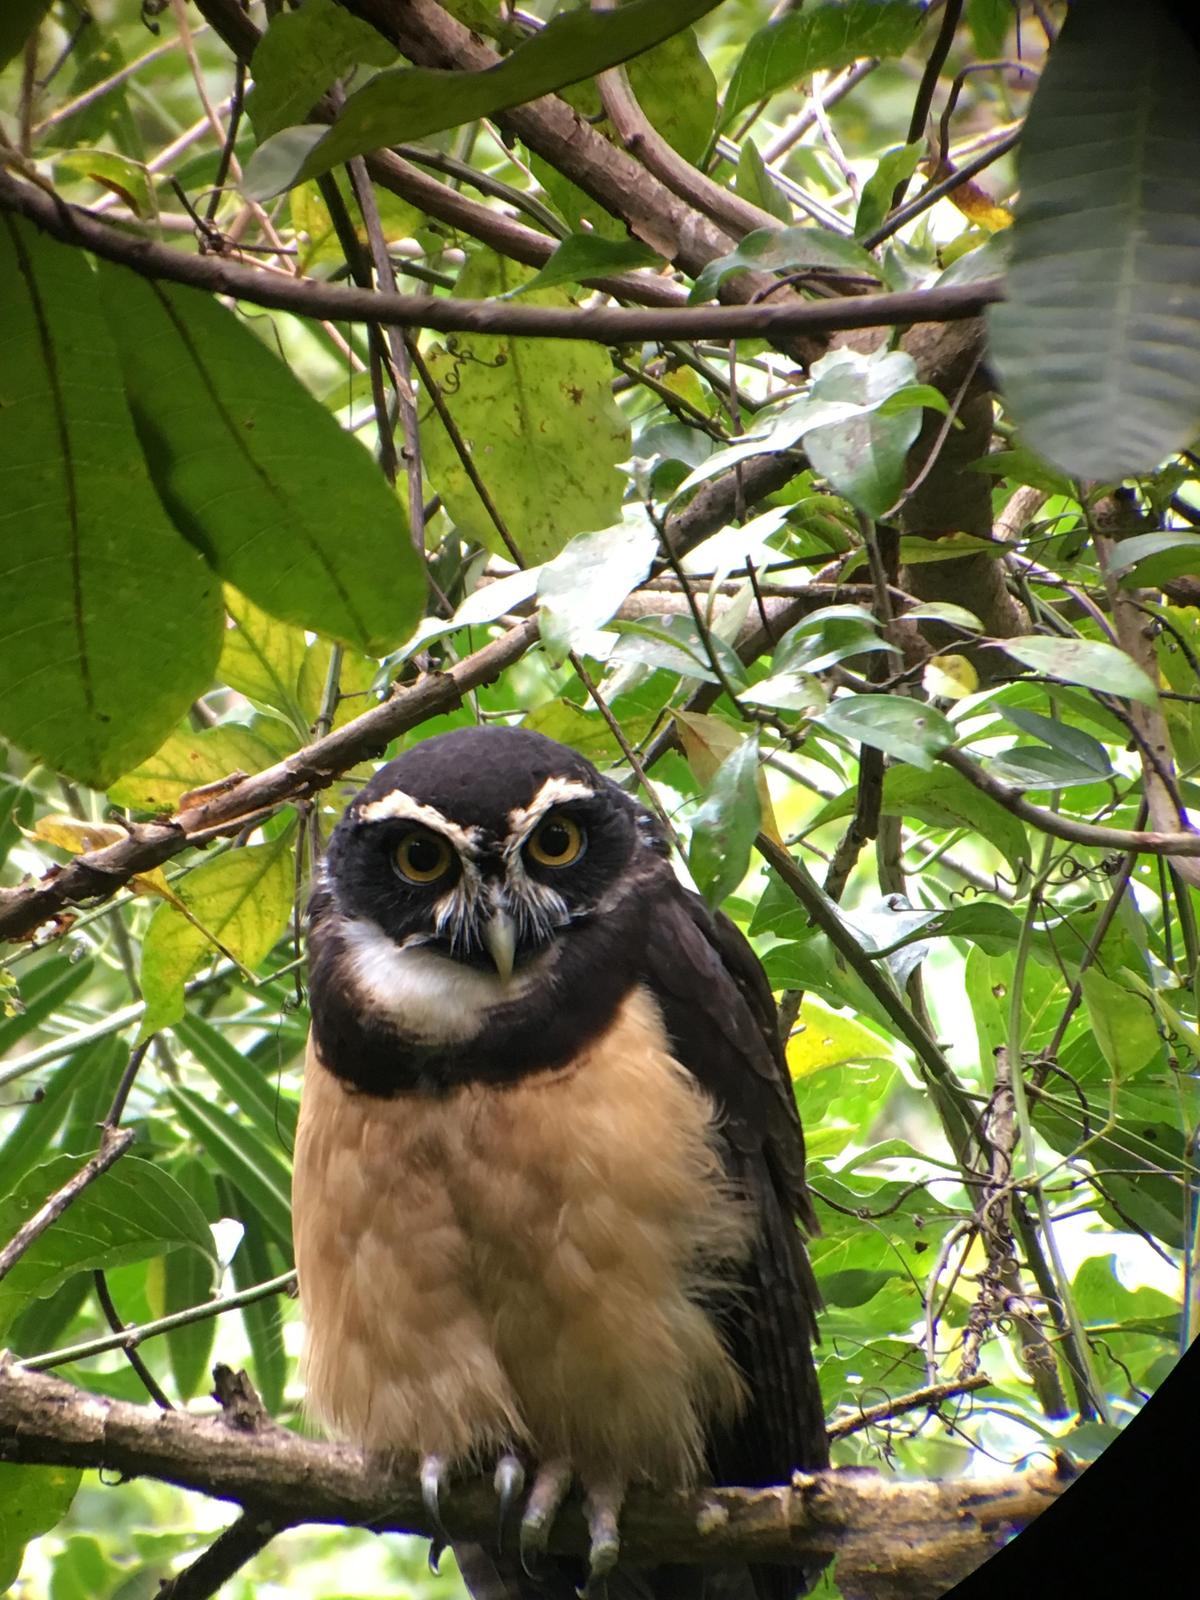 Spectacled Owl Photo by Charles Vellios